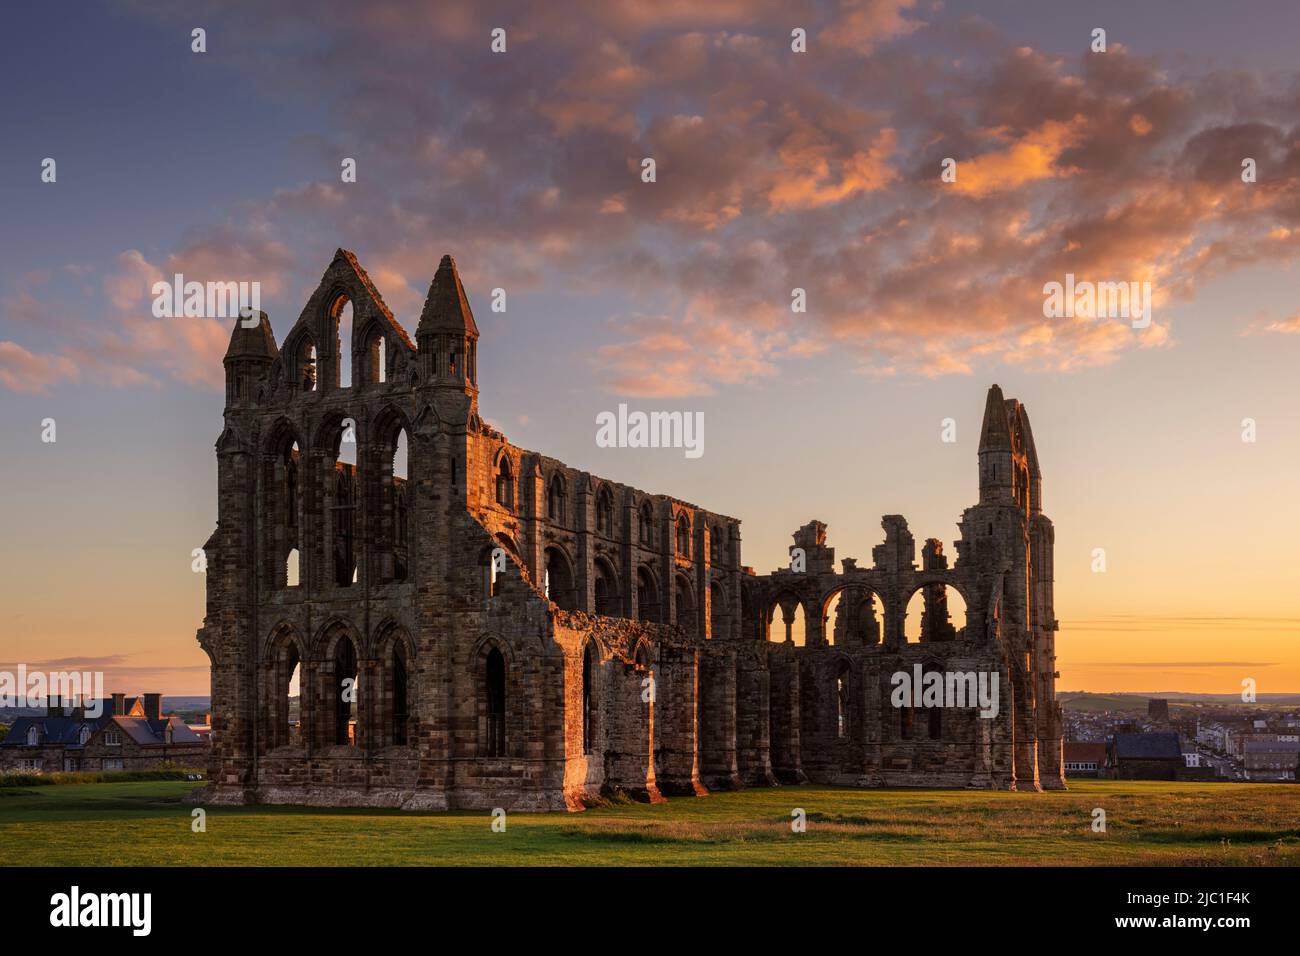 Whitby abbey at sunset Whitby Yorkshire Whitby North Yorkshire England Great Britain UK GB Europe Stock Photo